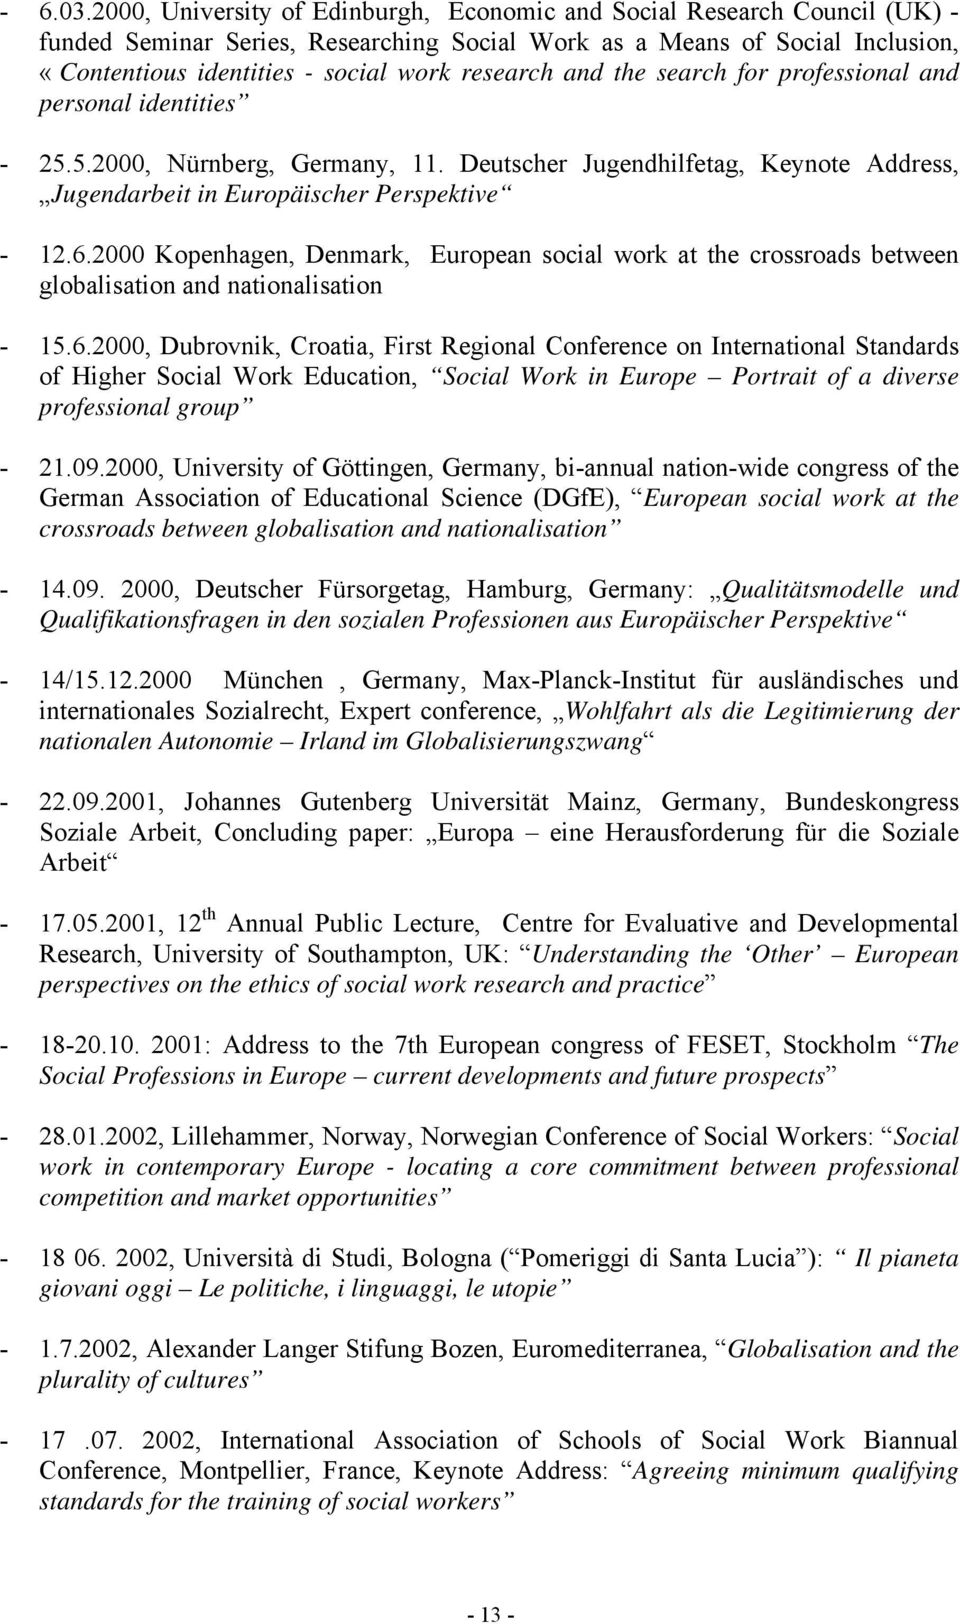 research and the search for professional and personal identities - 25.5.2000, Nürnberg, Germany, 11. Deutscher Jugendhilfetag, Keynote Address, Jugendarbeit in Europäischer Perspektive - 12.6.